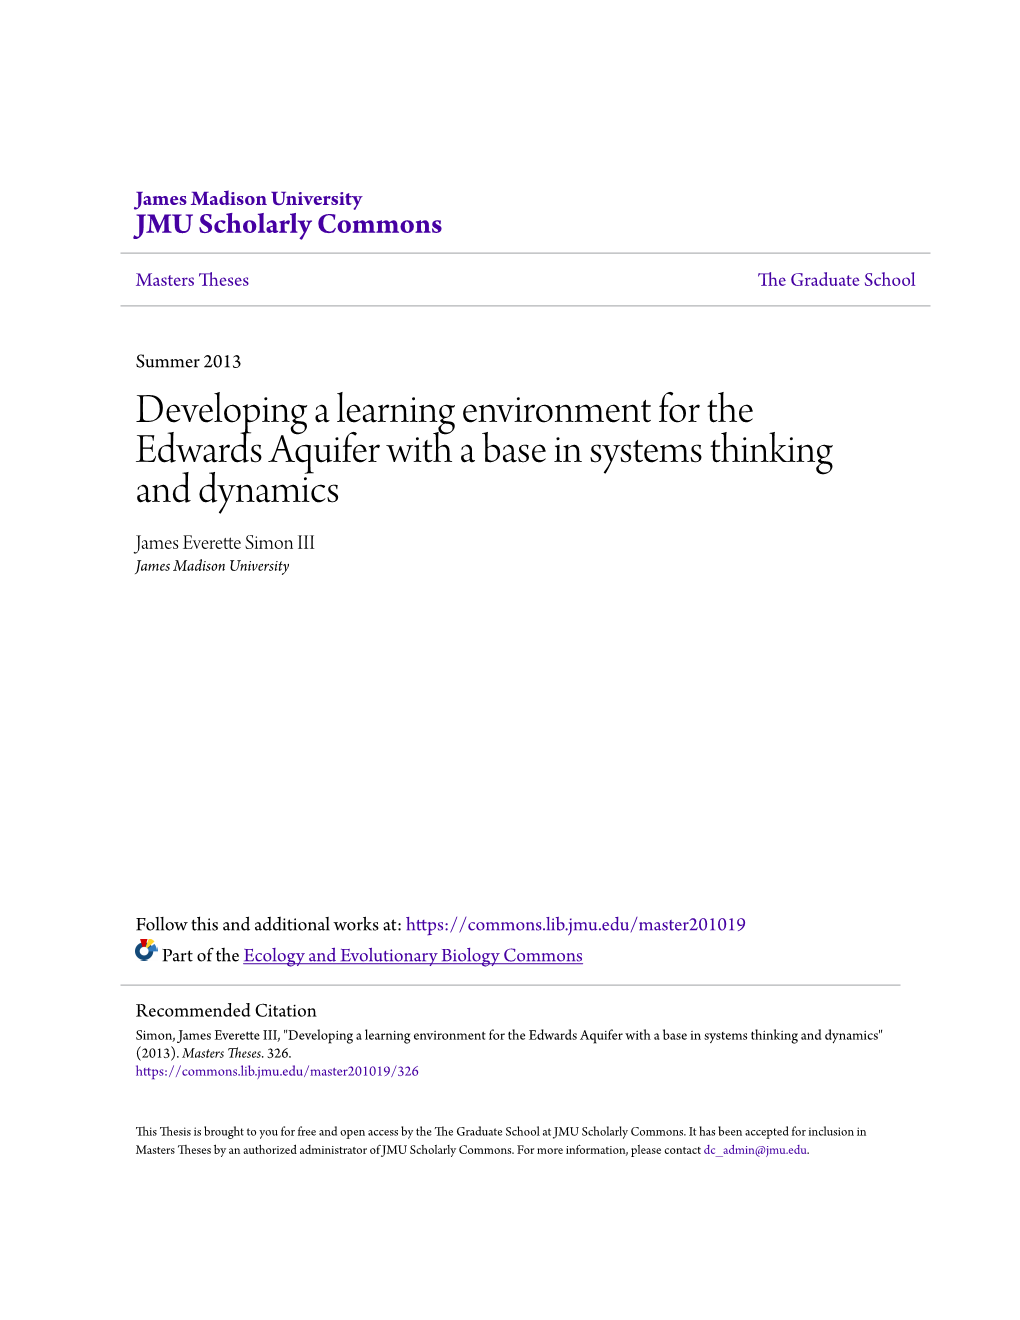 Developing a Learning Environment for the Edwards Aquifer with a Base in Systems Thinking and Dynamics James Everette Simon III James Madison University